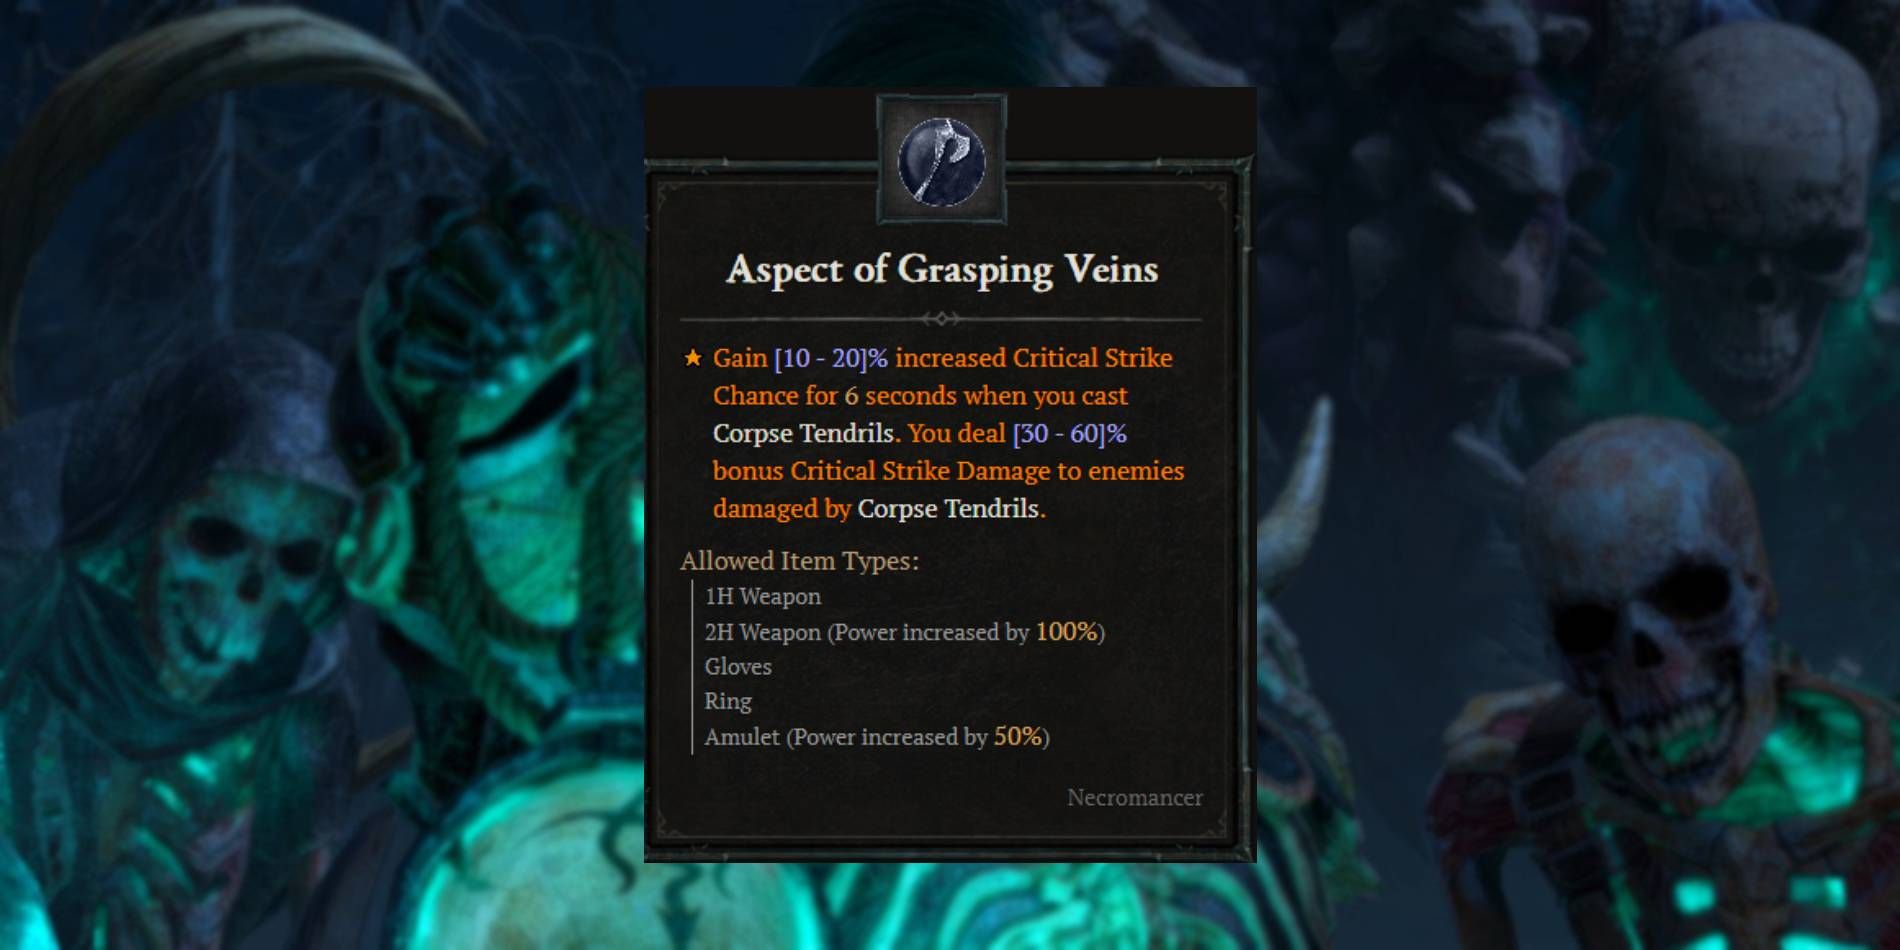 Diablo 4 Necromancer Aspect of Grasping Veins from Codex of Power